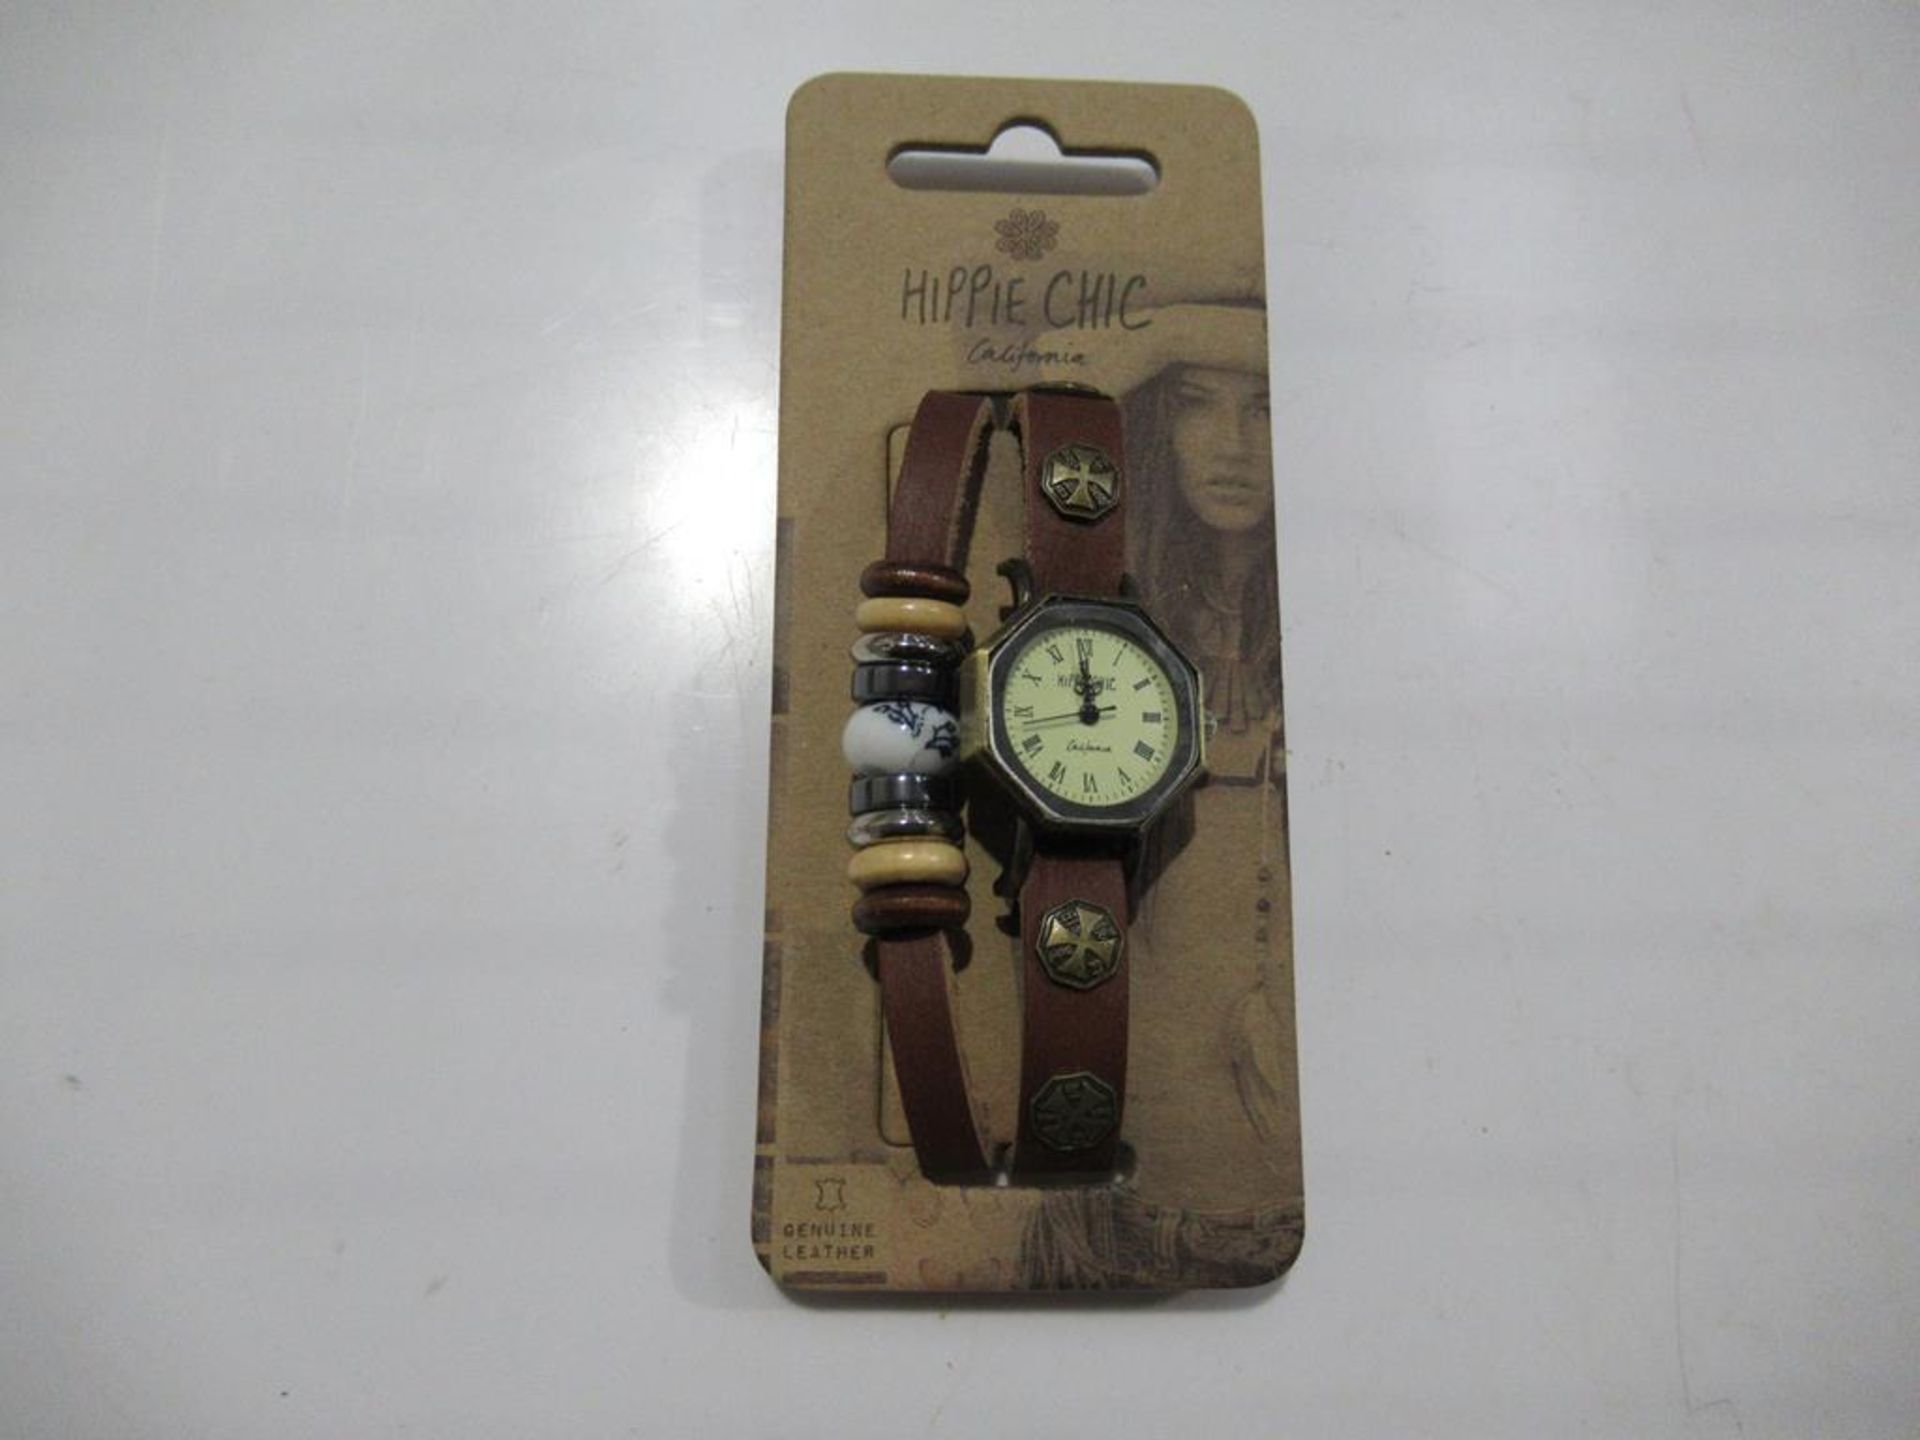 A box of Hippie Chic 'Indie Watch Tan' watches - Image 2 of 3